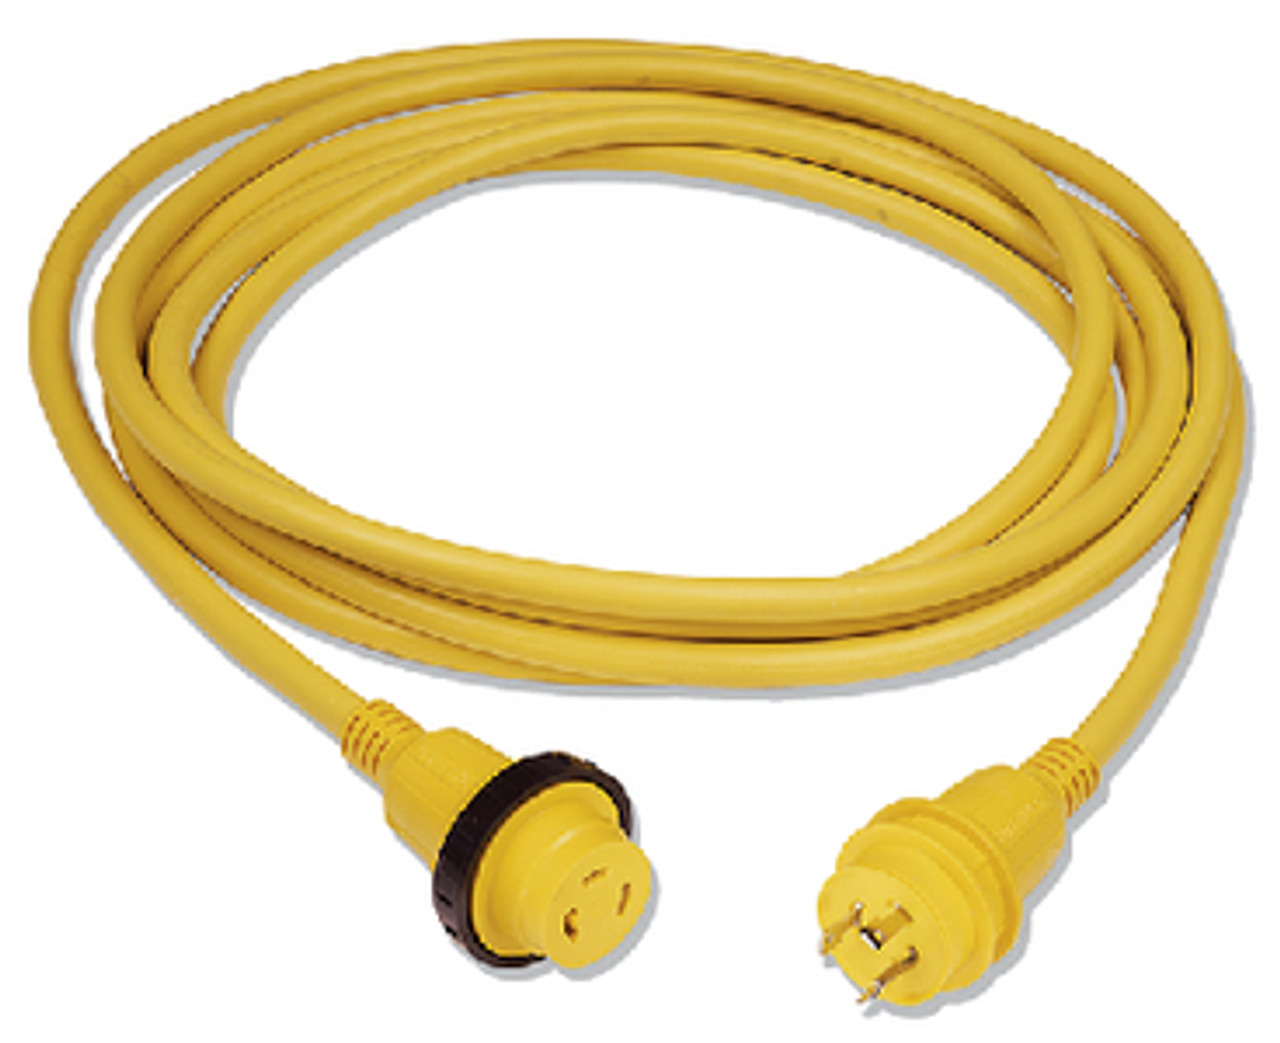 MARINCOÂ®  - 30A 125V POWERCORD PLUSÂ® CORDSET WITH LED - Rating: 30A, 125V Length: 25' Color: Yellow